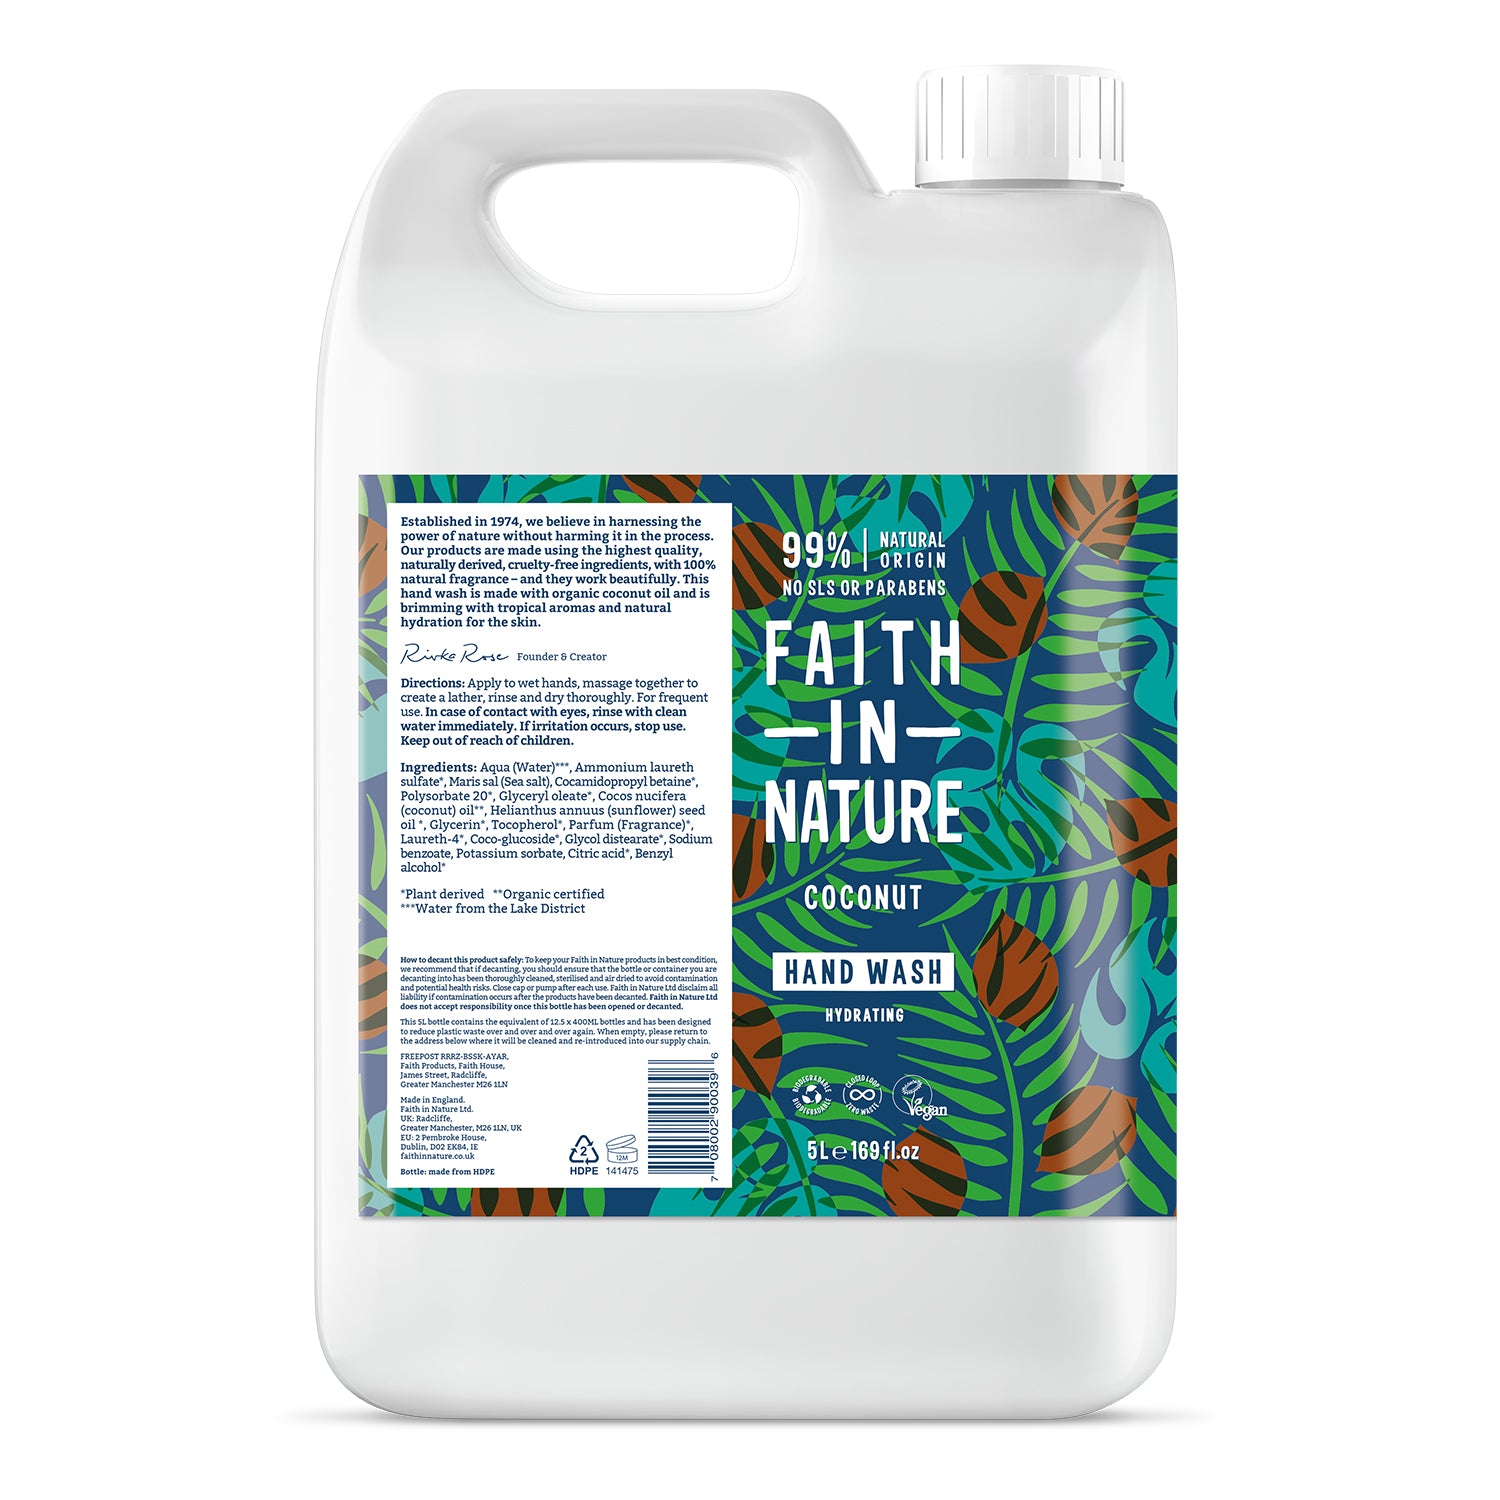 Faith in Nature - Coconut Hand Wash 5ltr